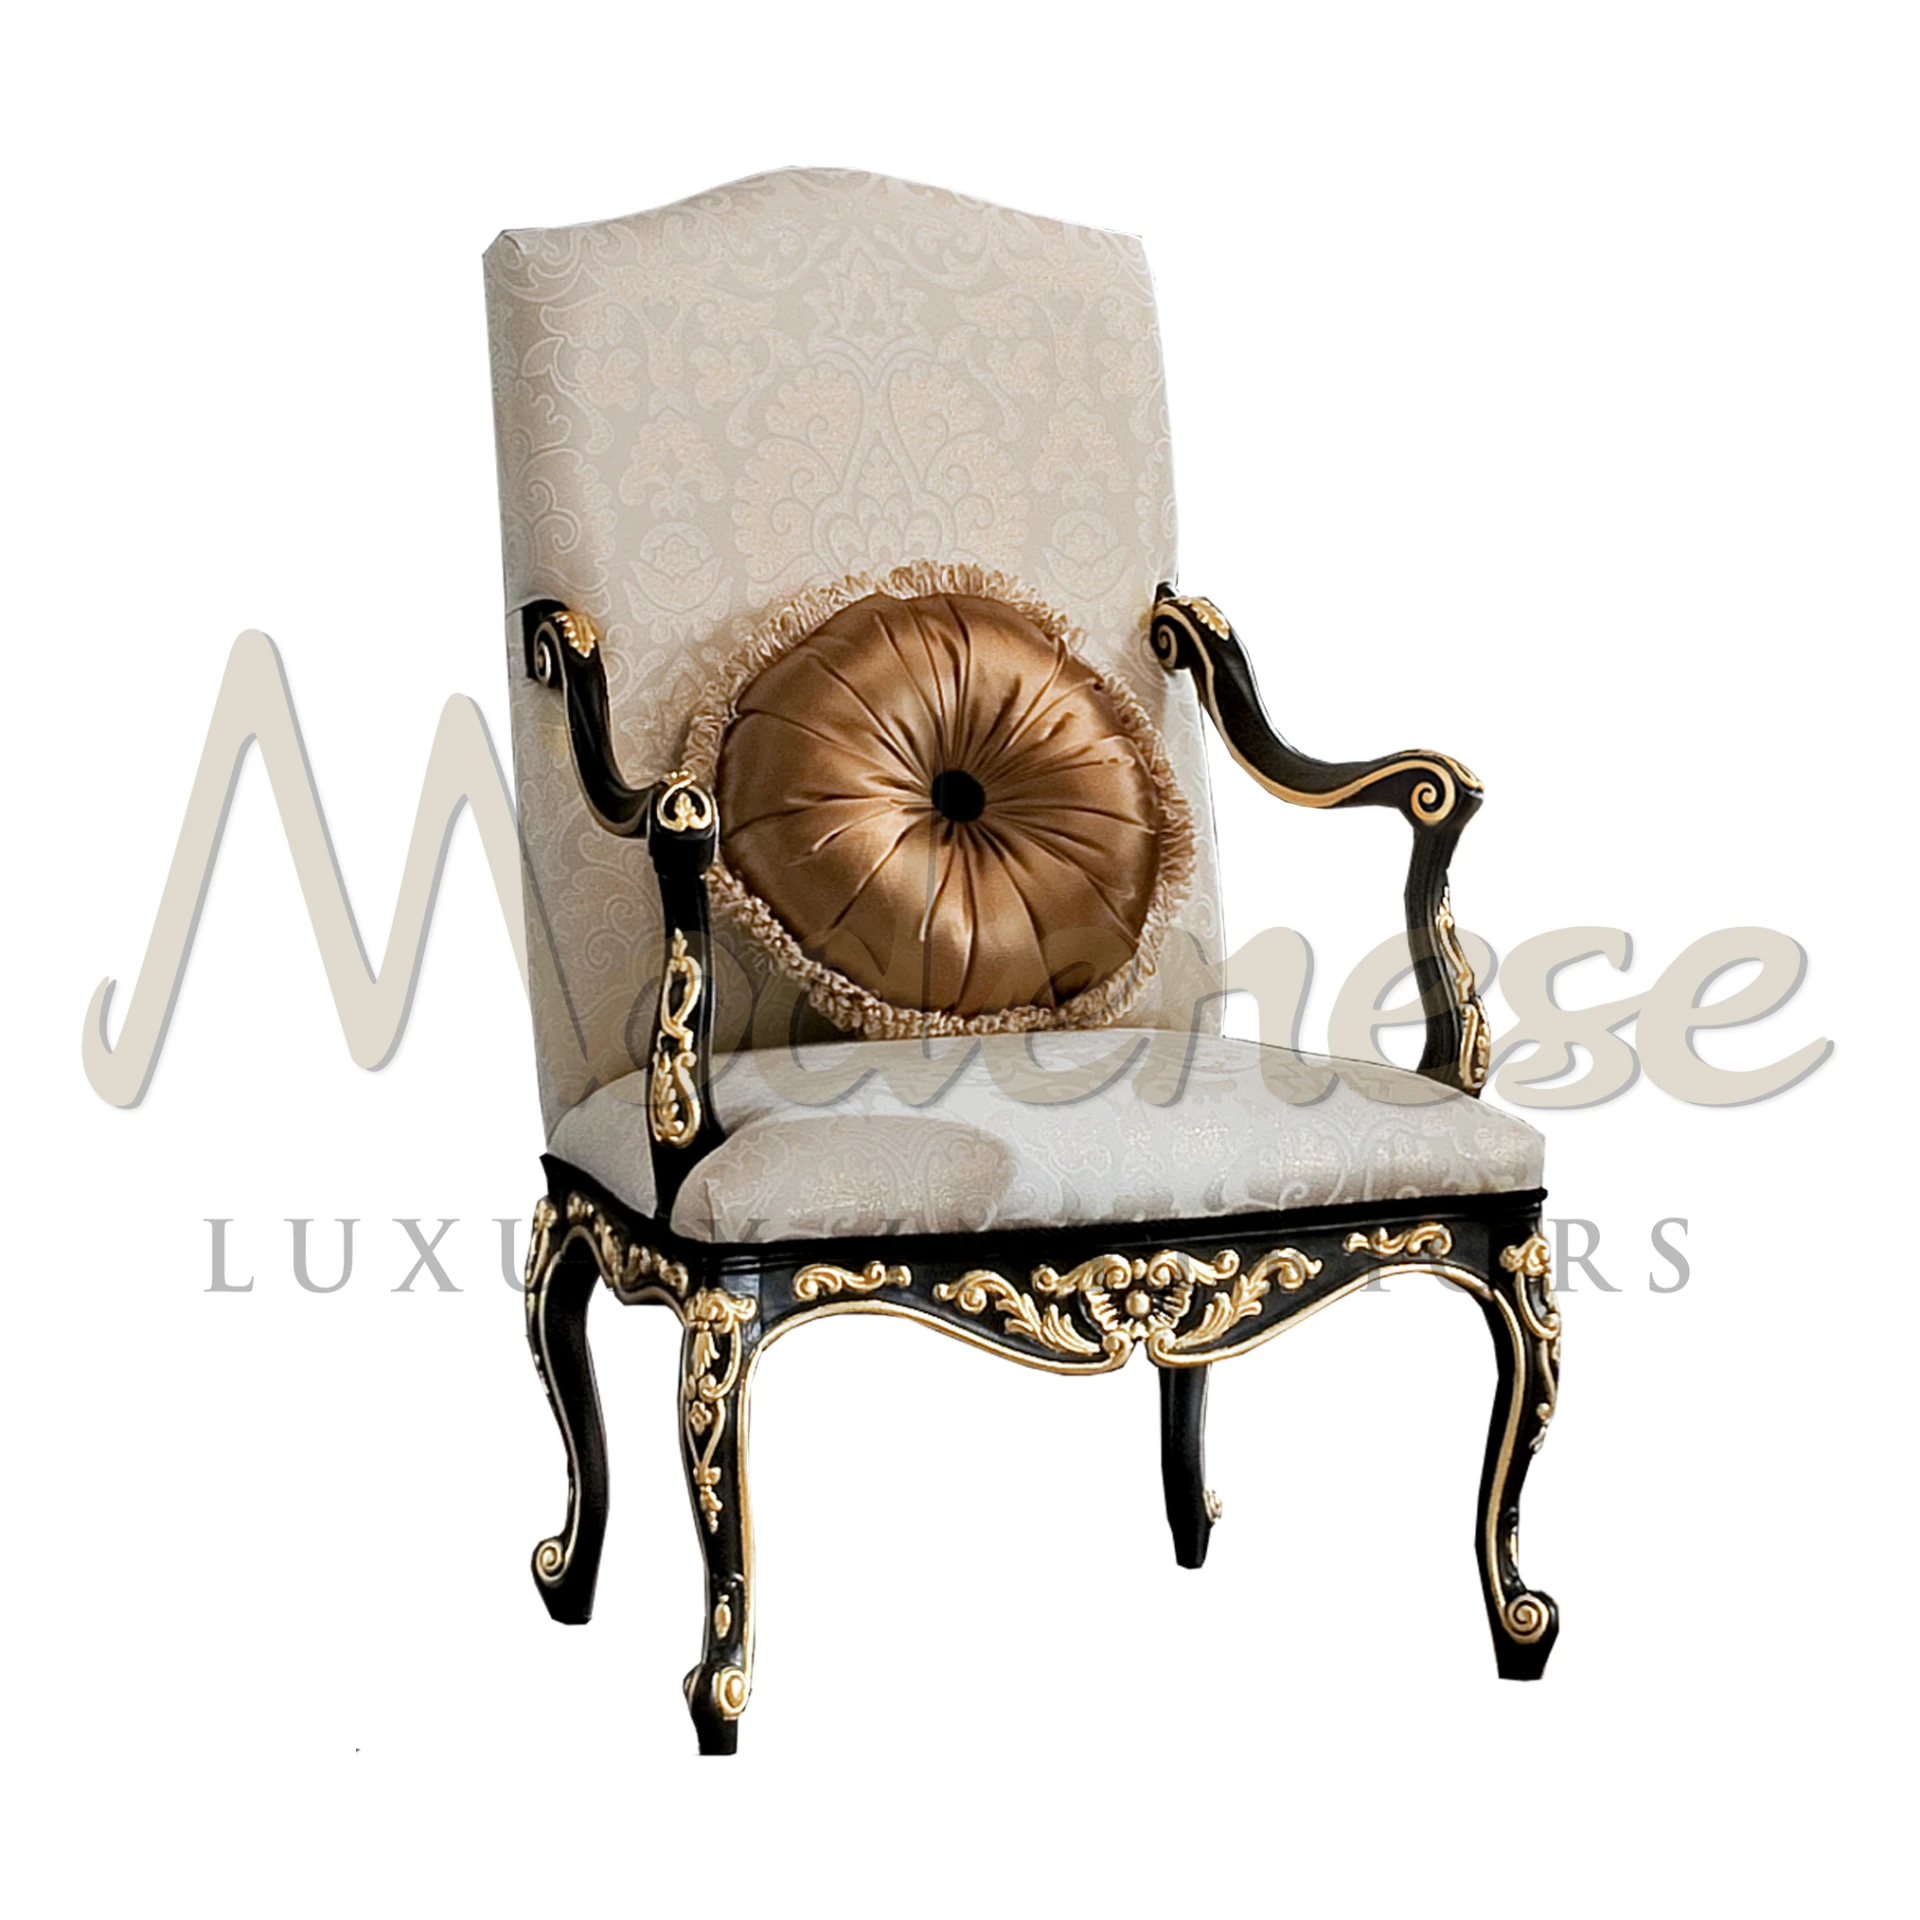 Custom Rococo Armchair: Exquisite Design with Personalized Fabric